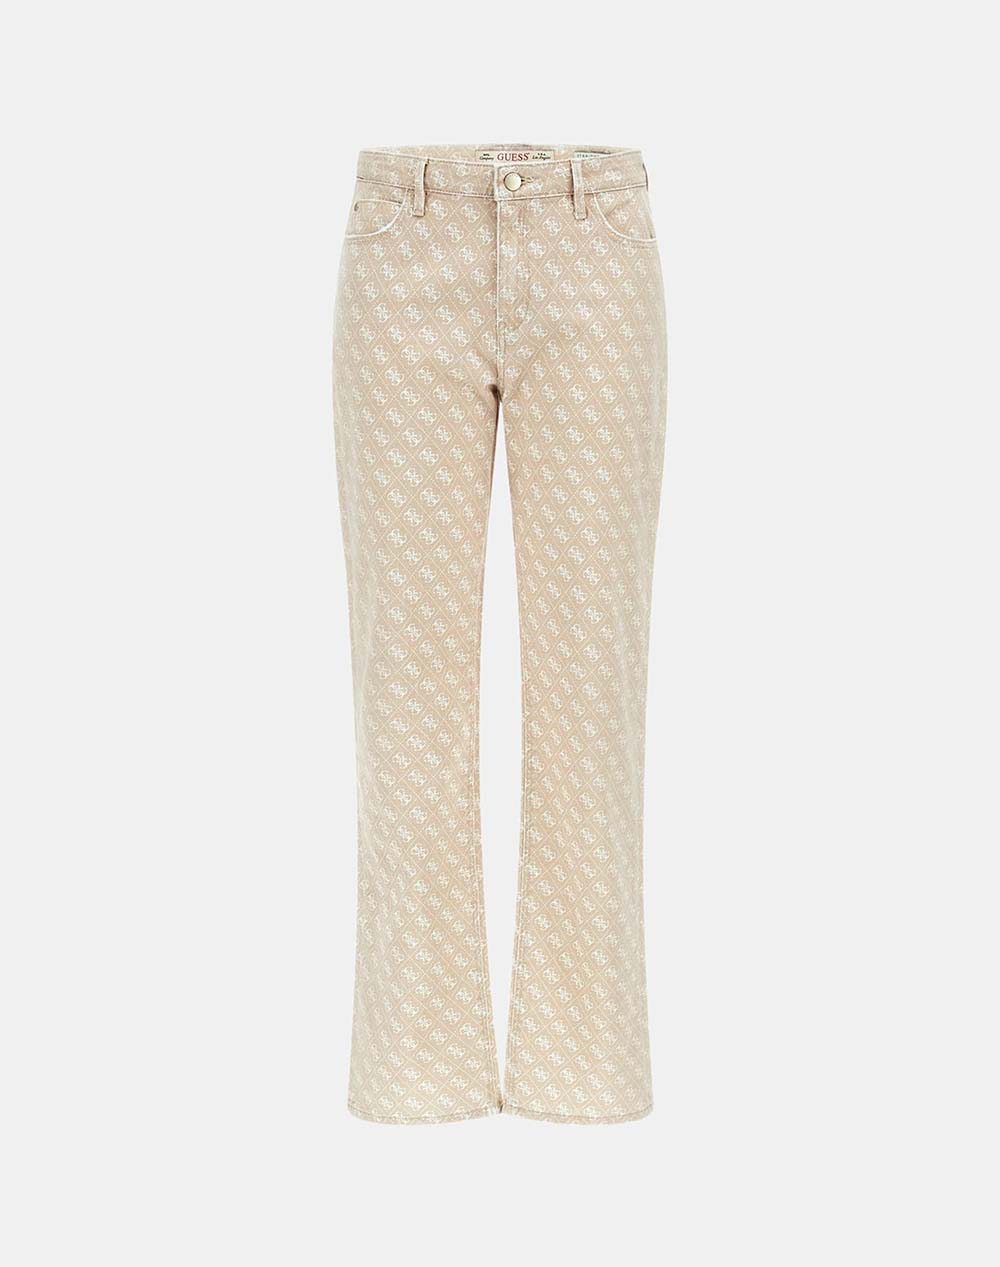 GUESS 1981 STRAIGHT PANT WOMEN